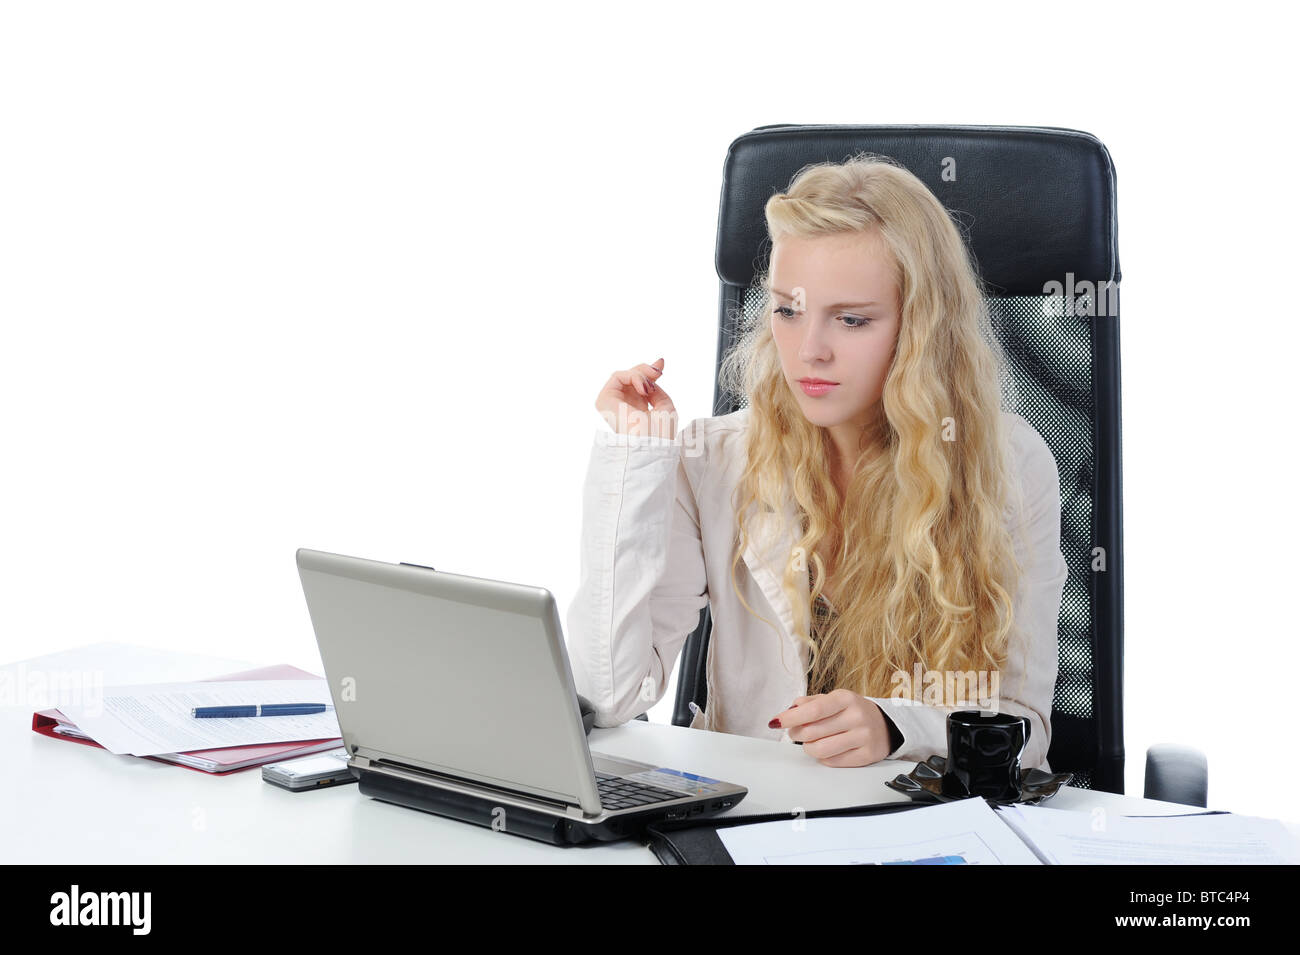 woman with laptop Stock Photo